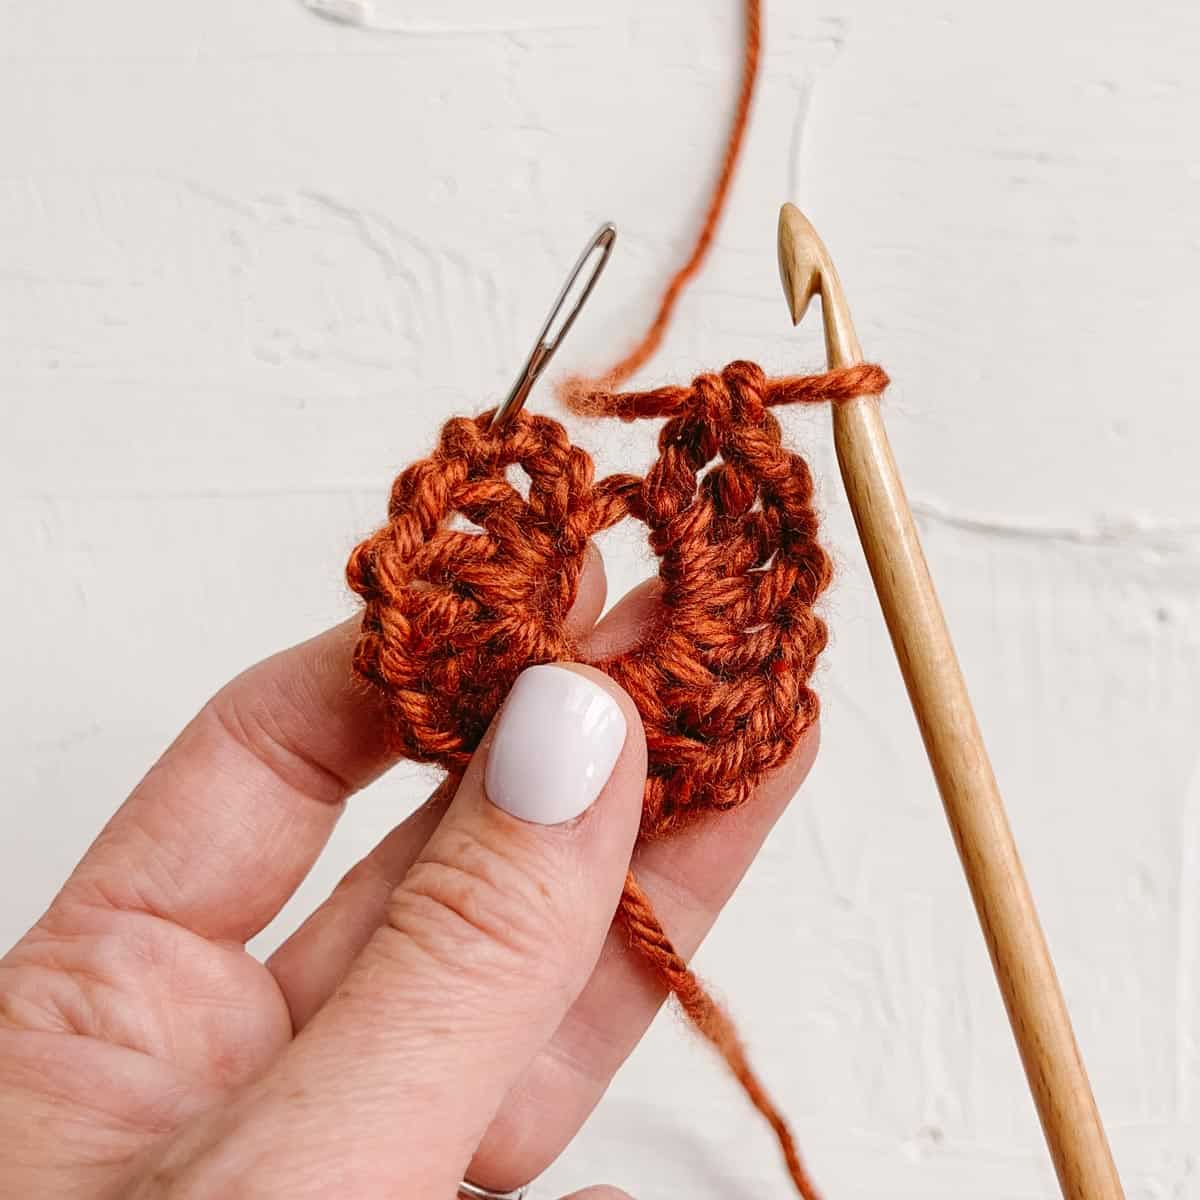 A circle of double crochet stitches made in burnt orange yarn.